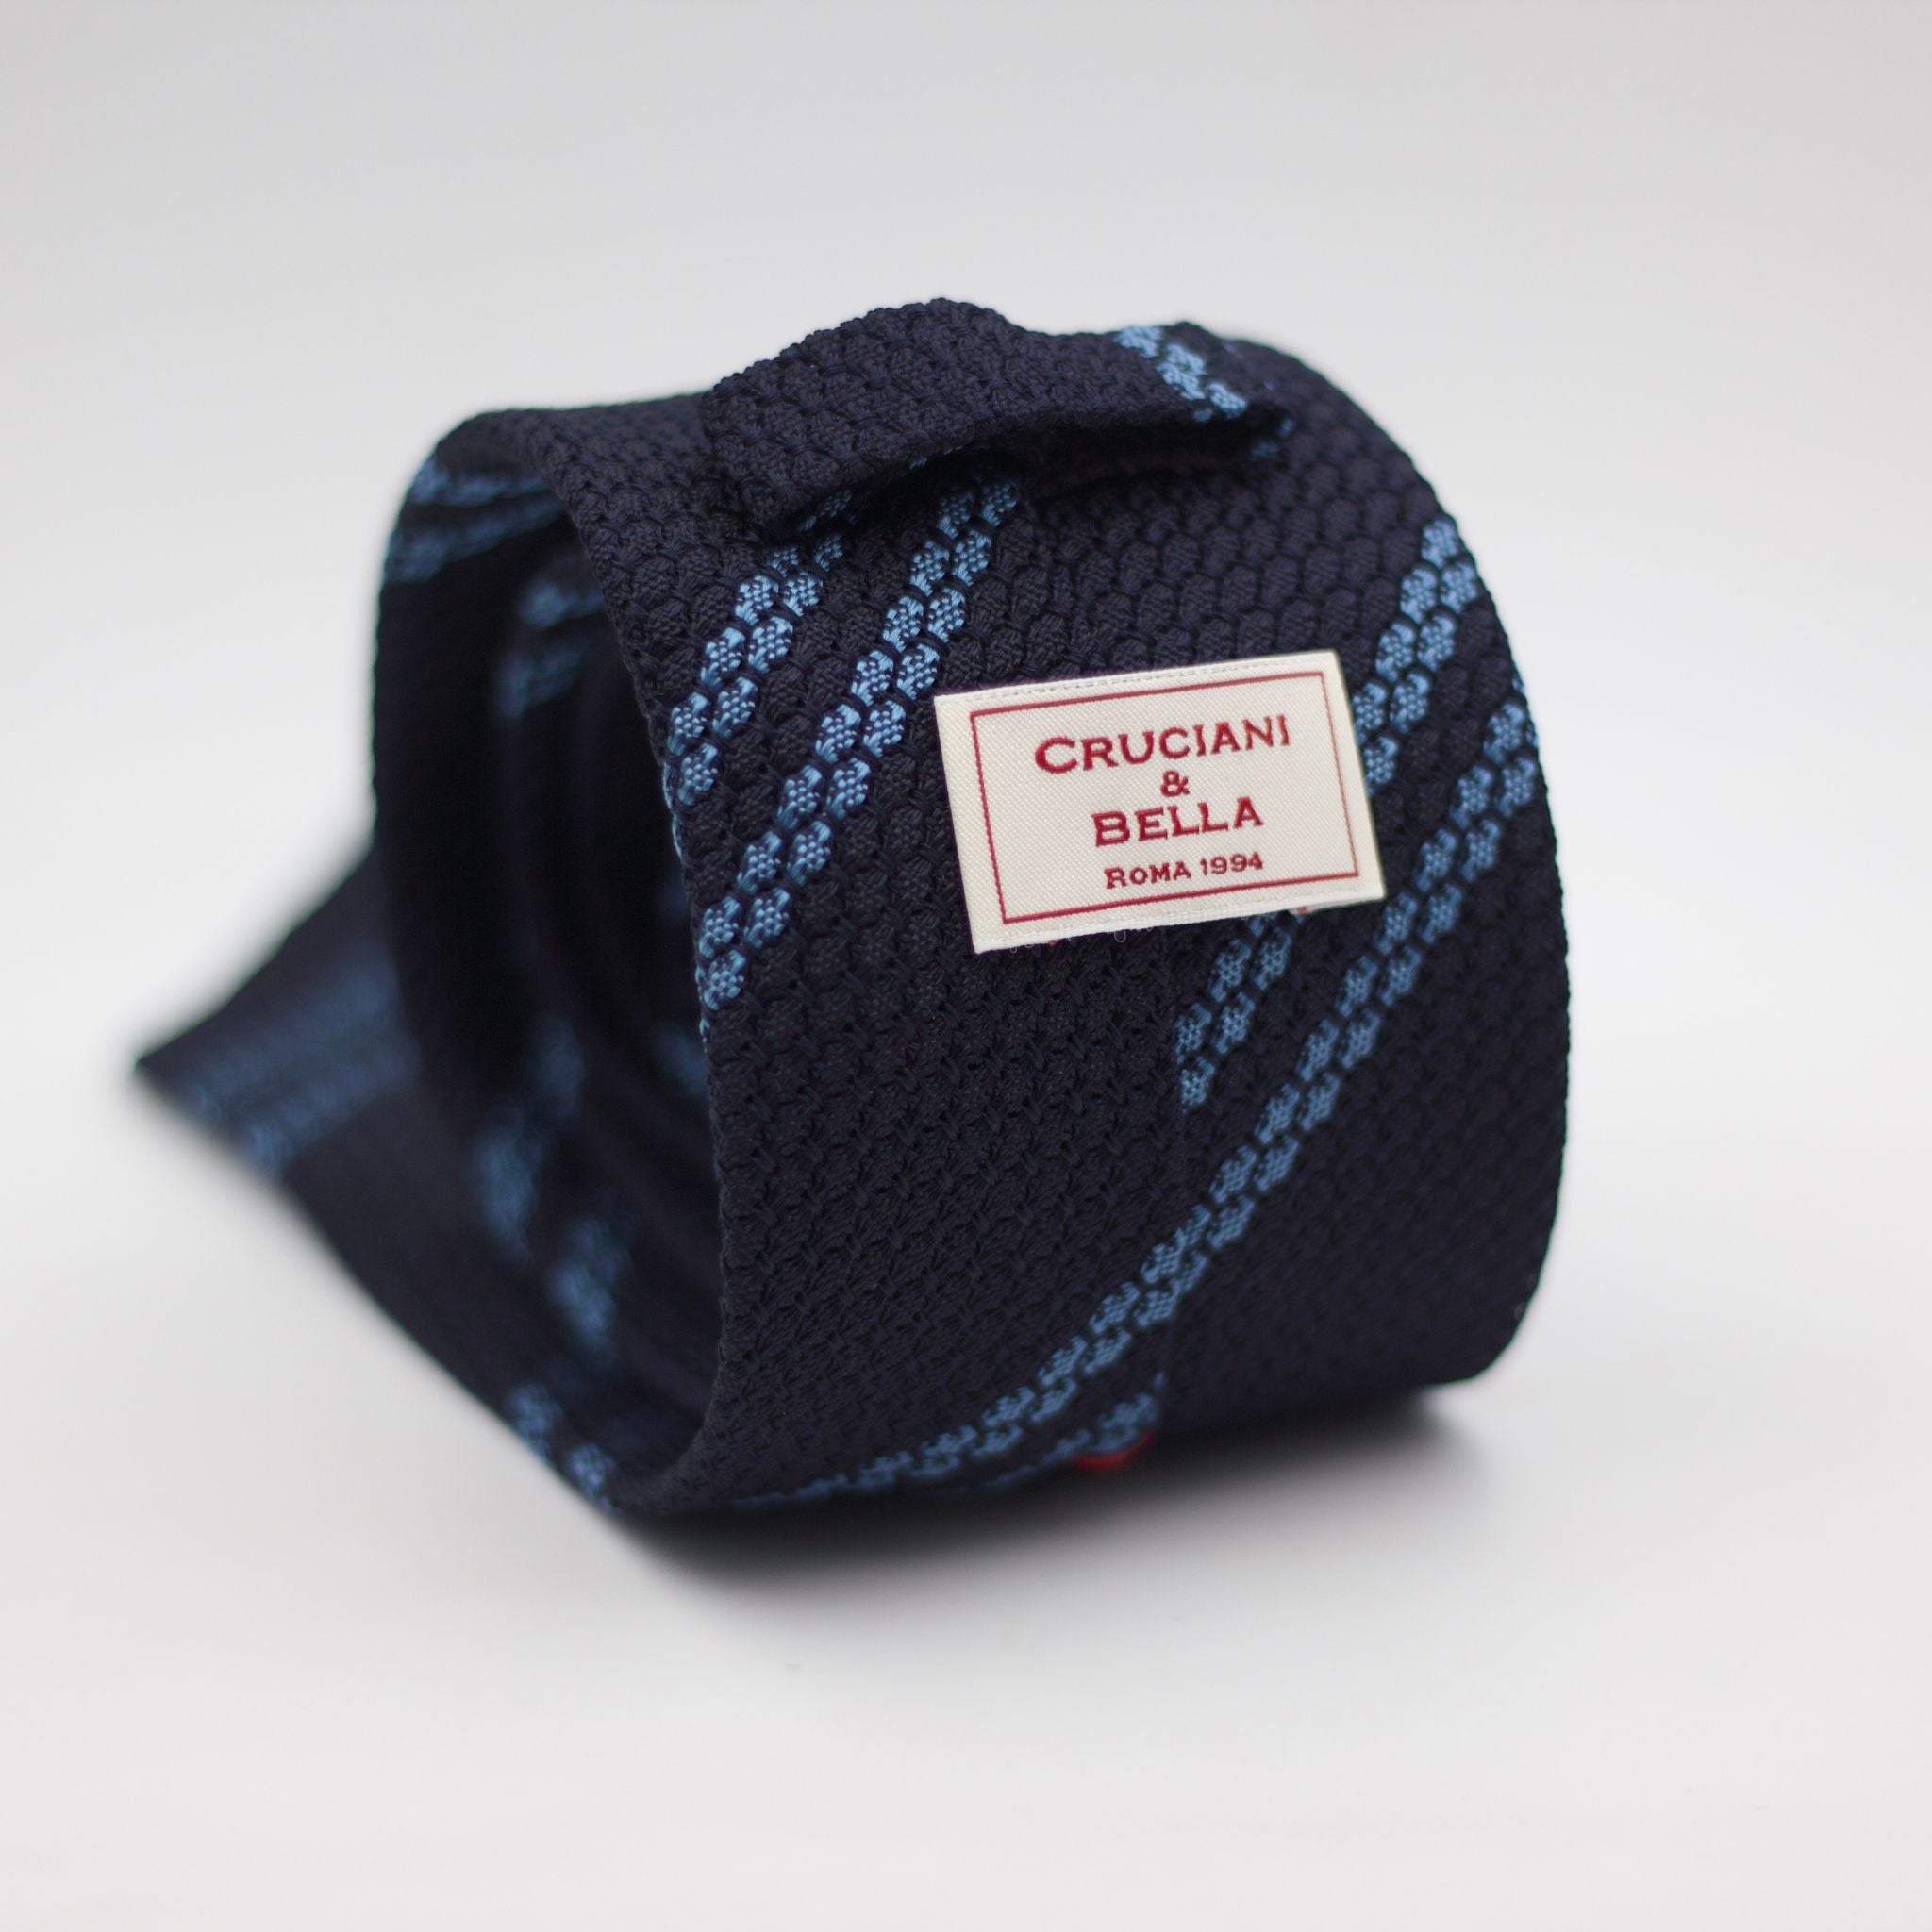 Cruciani & Bella 100% Silk Garza Grossa Woven in Italy Unlined Hand rolled blades Blue Navy and Light Blue Striped Handmade in Italy 8 cm x 150 cm